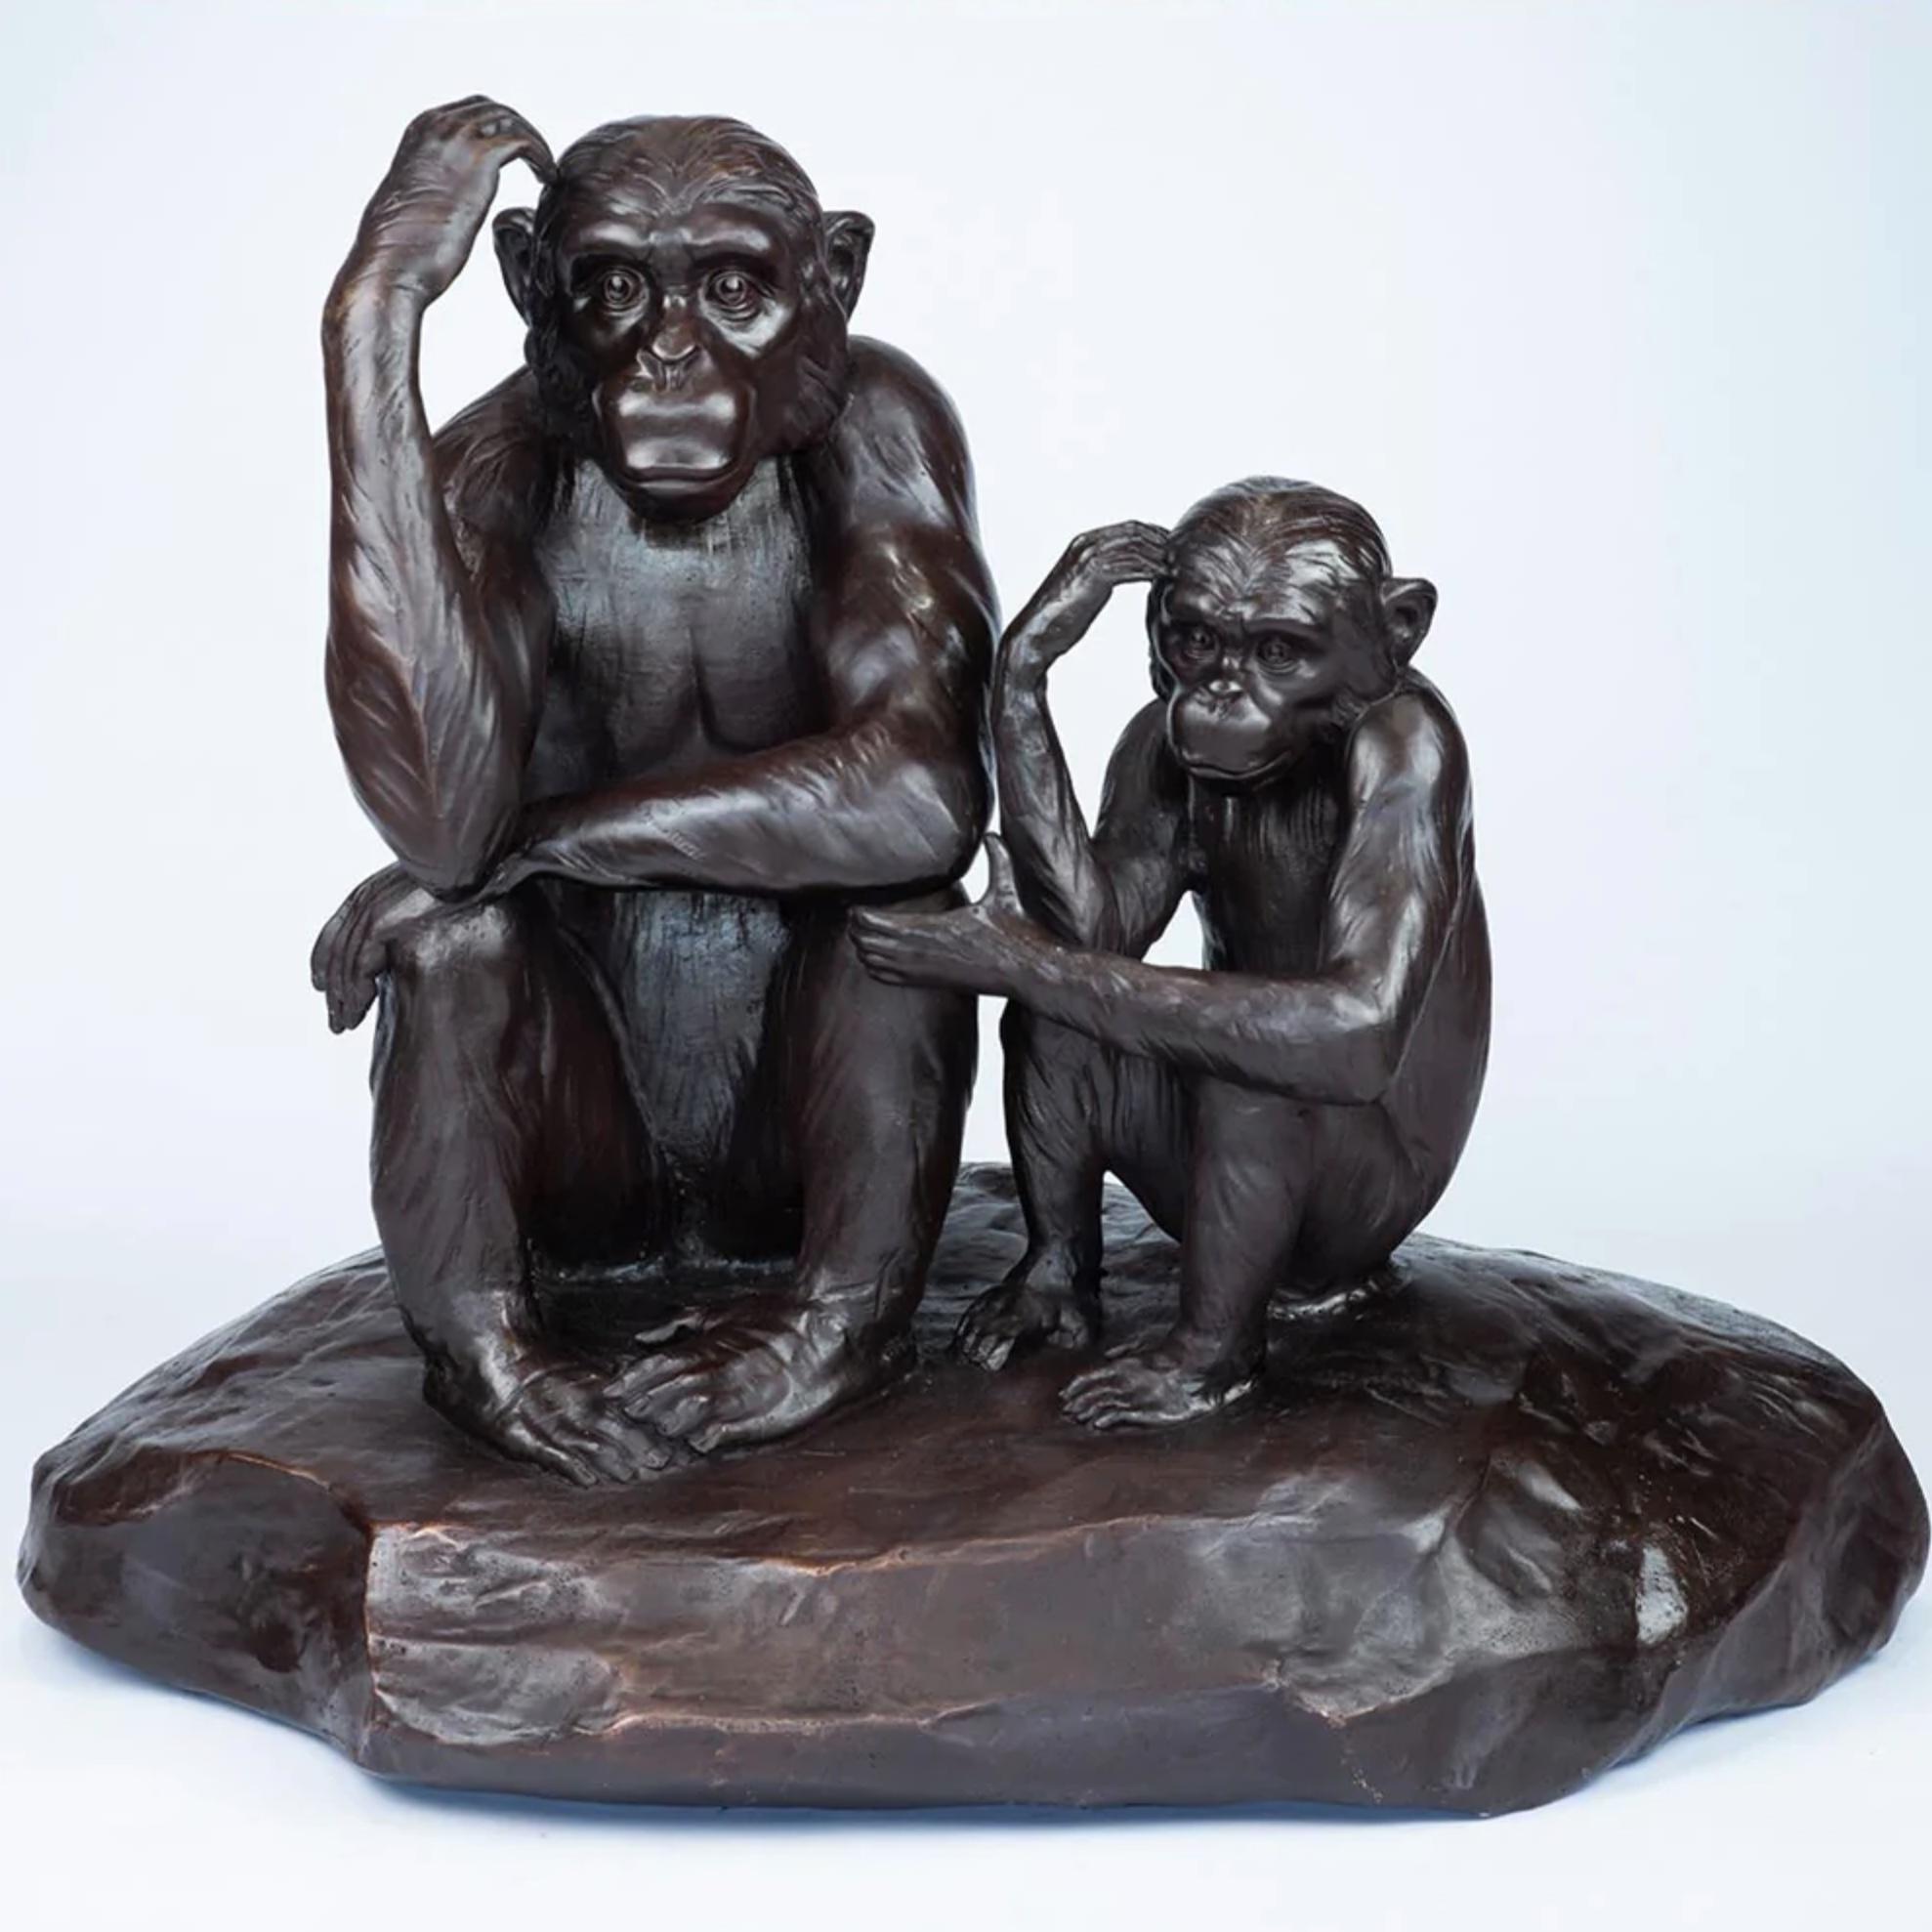 Authentic Bronze Chimp Imitation Medium Sculpture by Gillie and Marc  - Art by Gillie and Marc Schattner